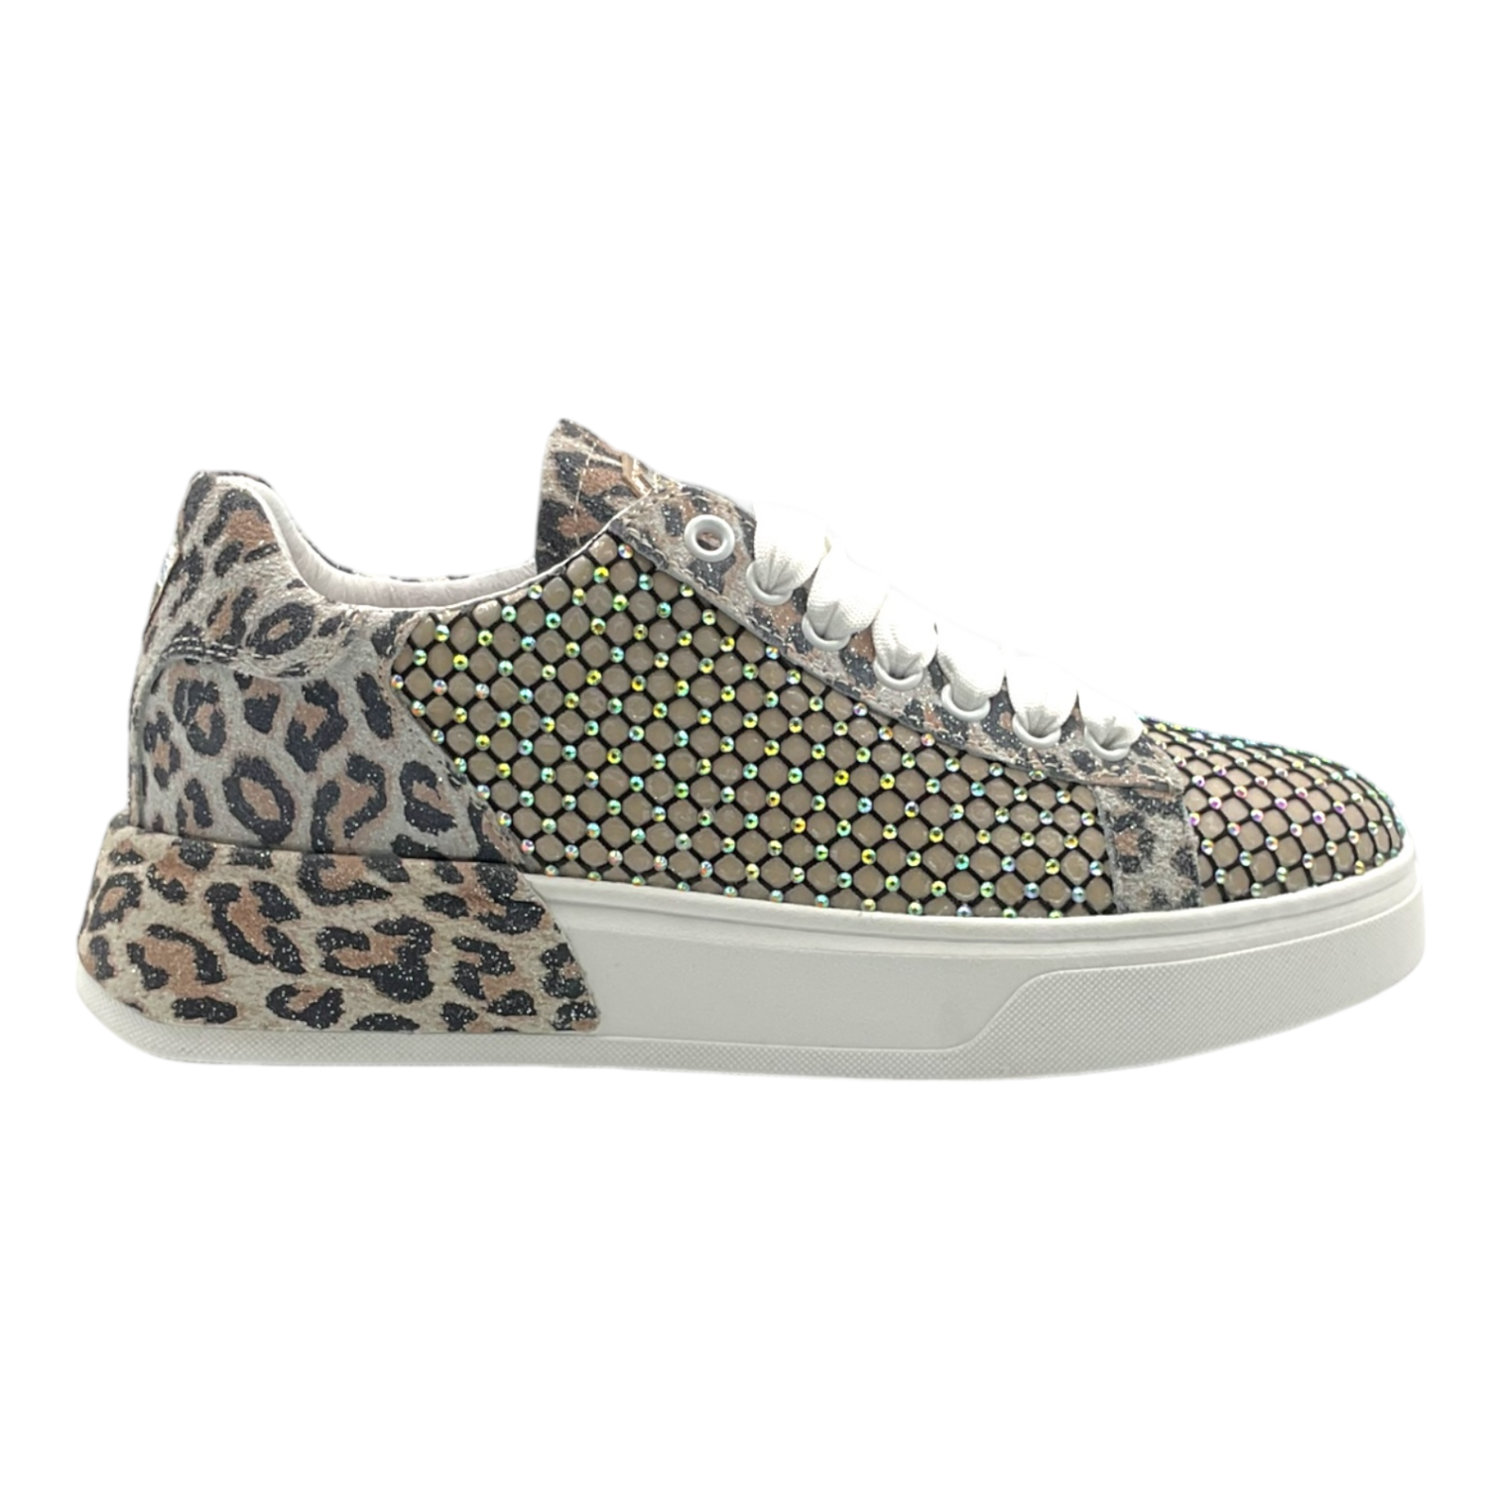 NIS Sneakers strass/leo